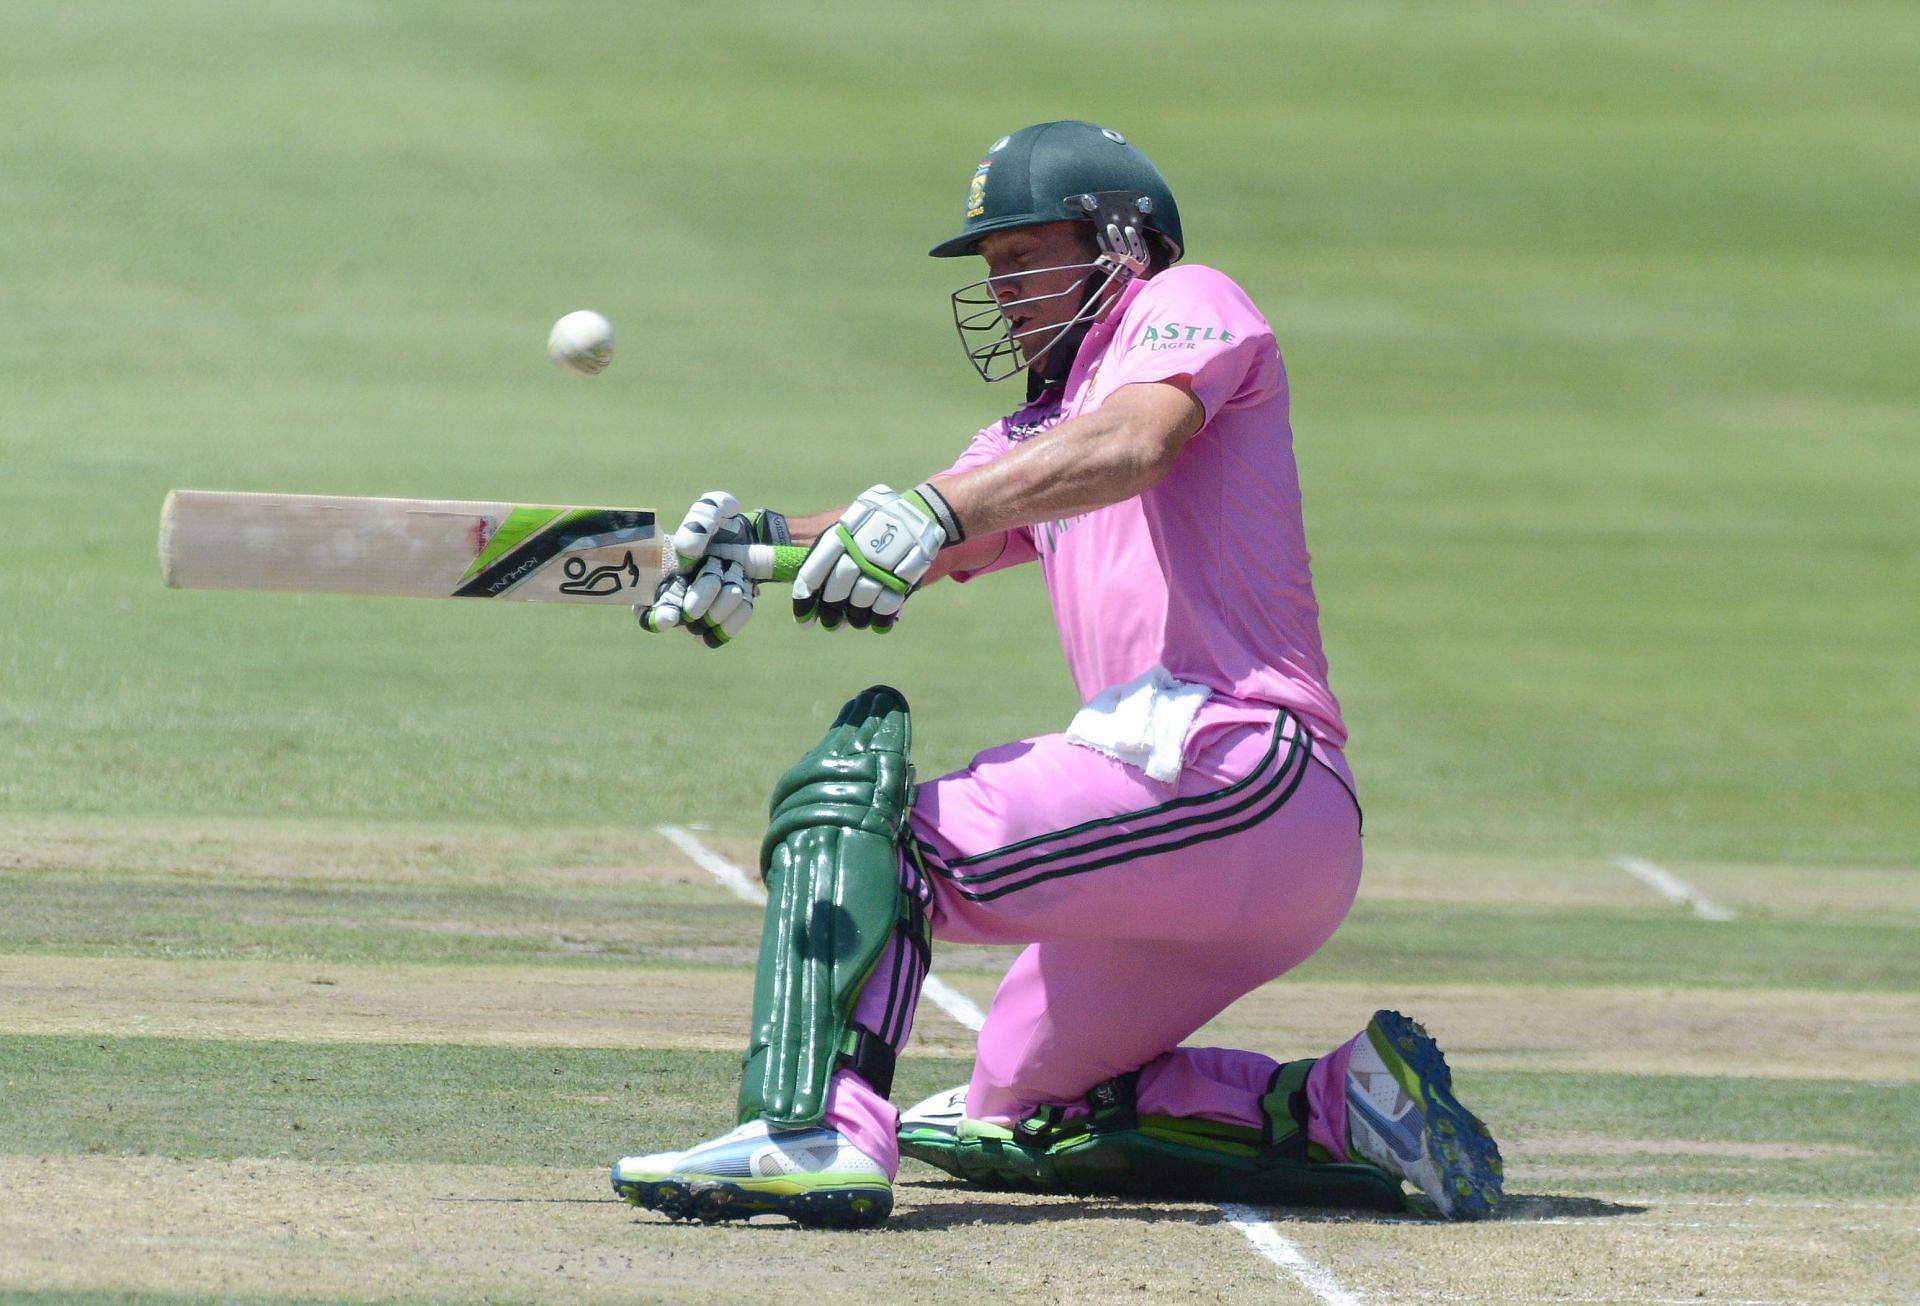 ABD plays a sweep during a match between South Africa and Pakistan. Pic: Getty Images